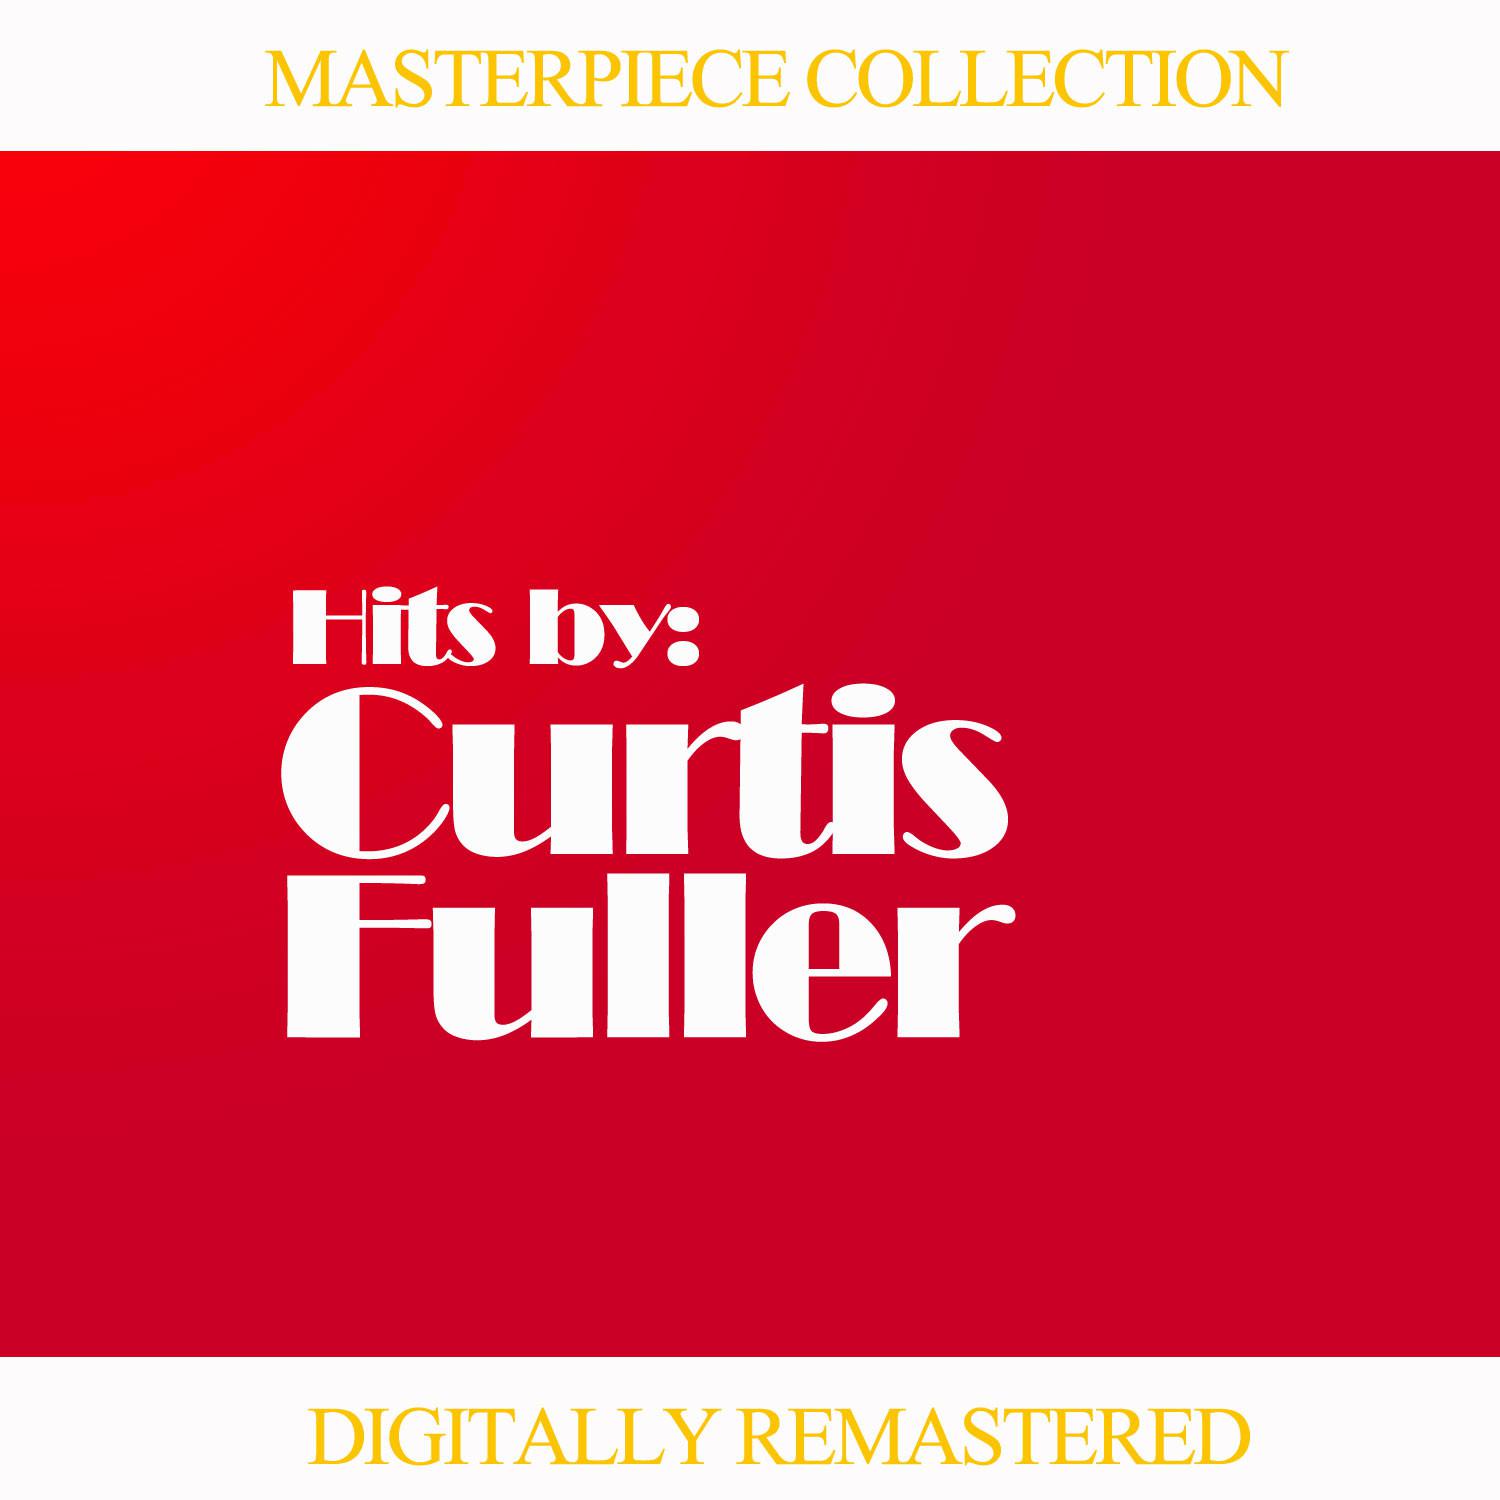 Masterpiece Collection of Curtis Fuller